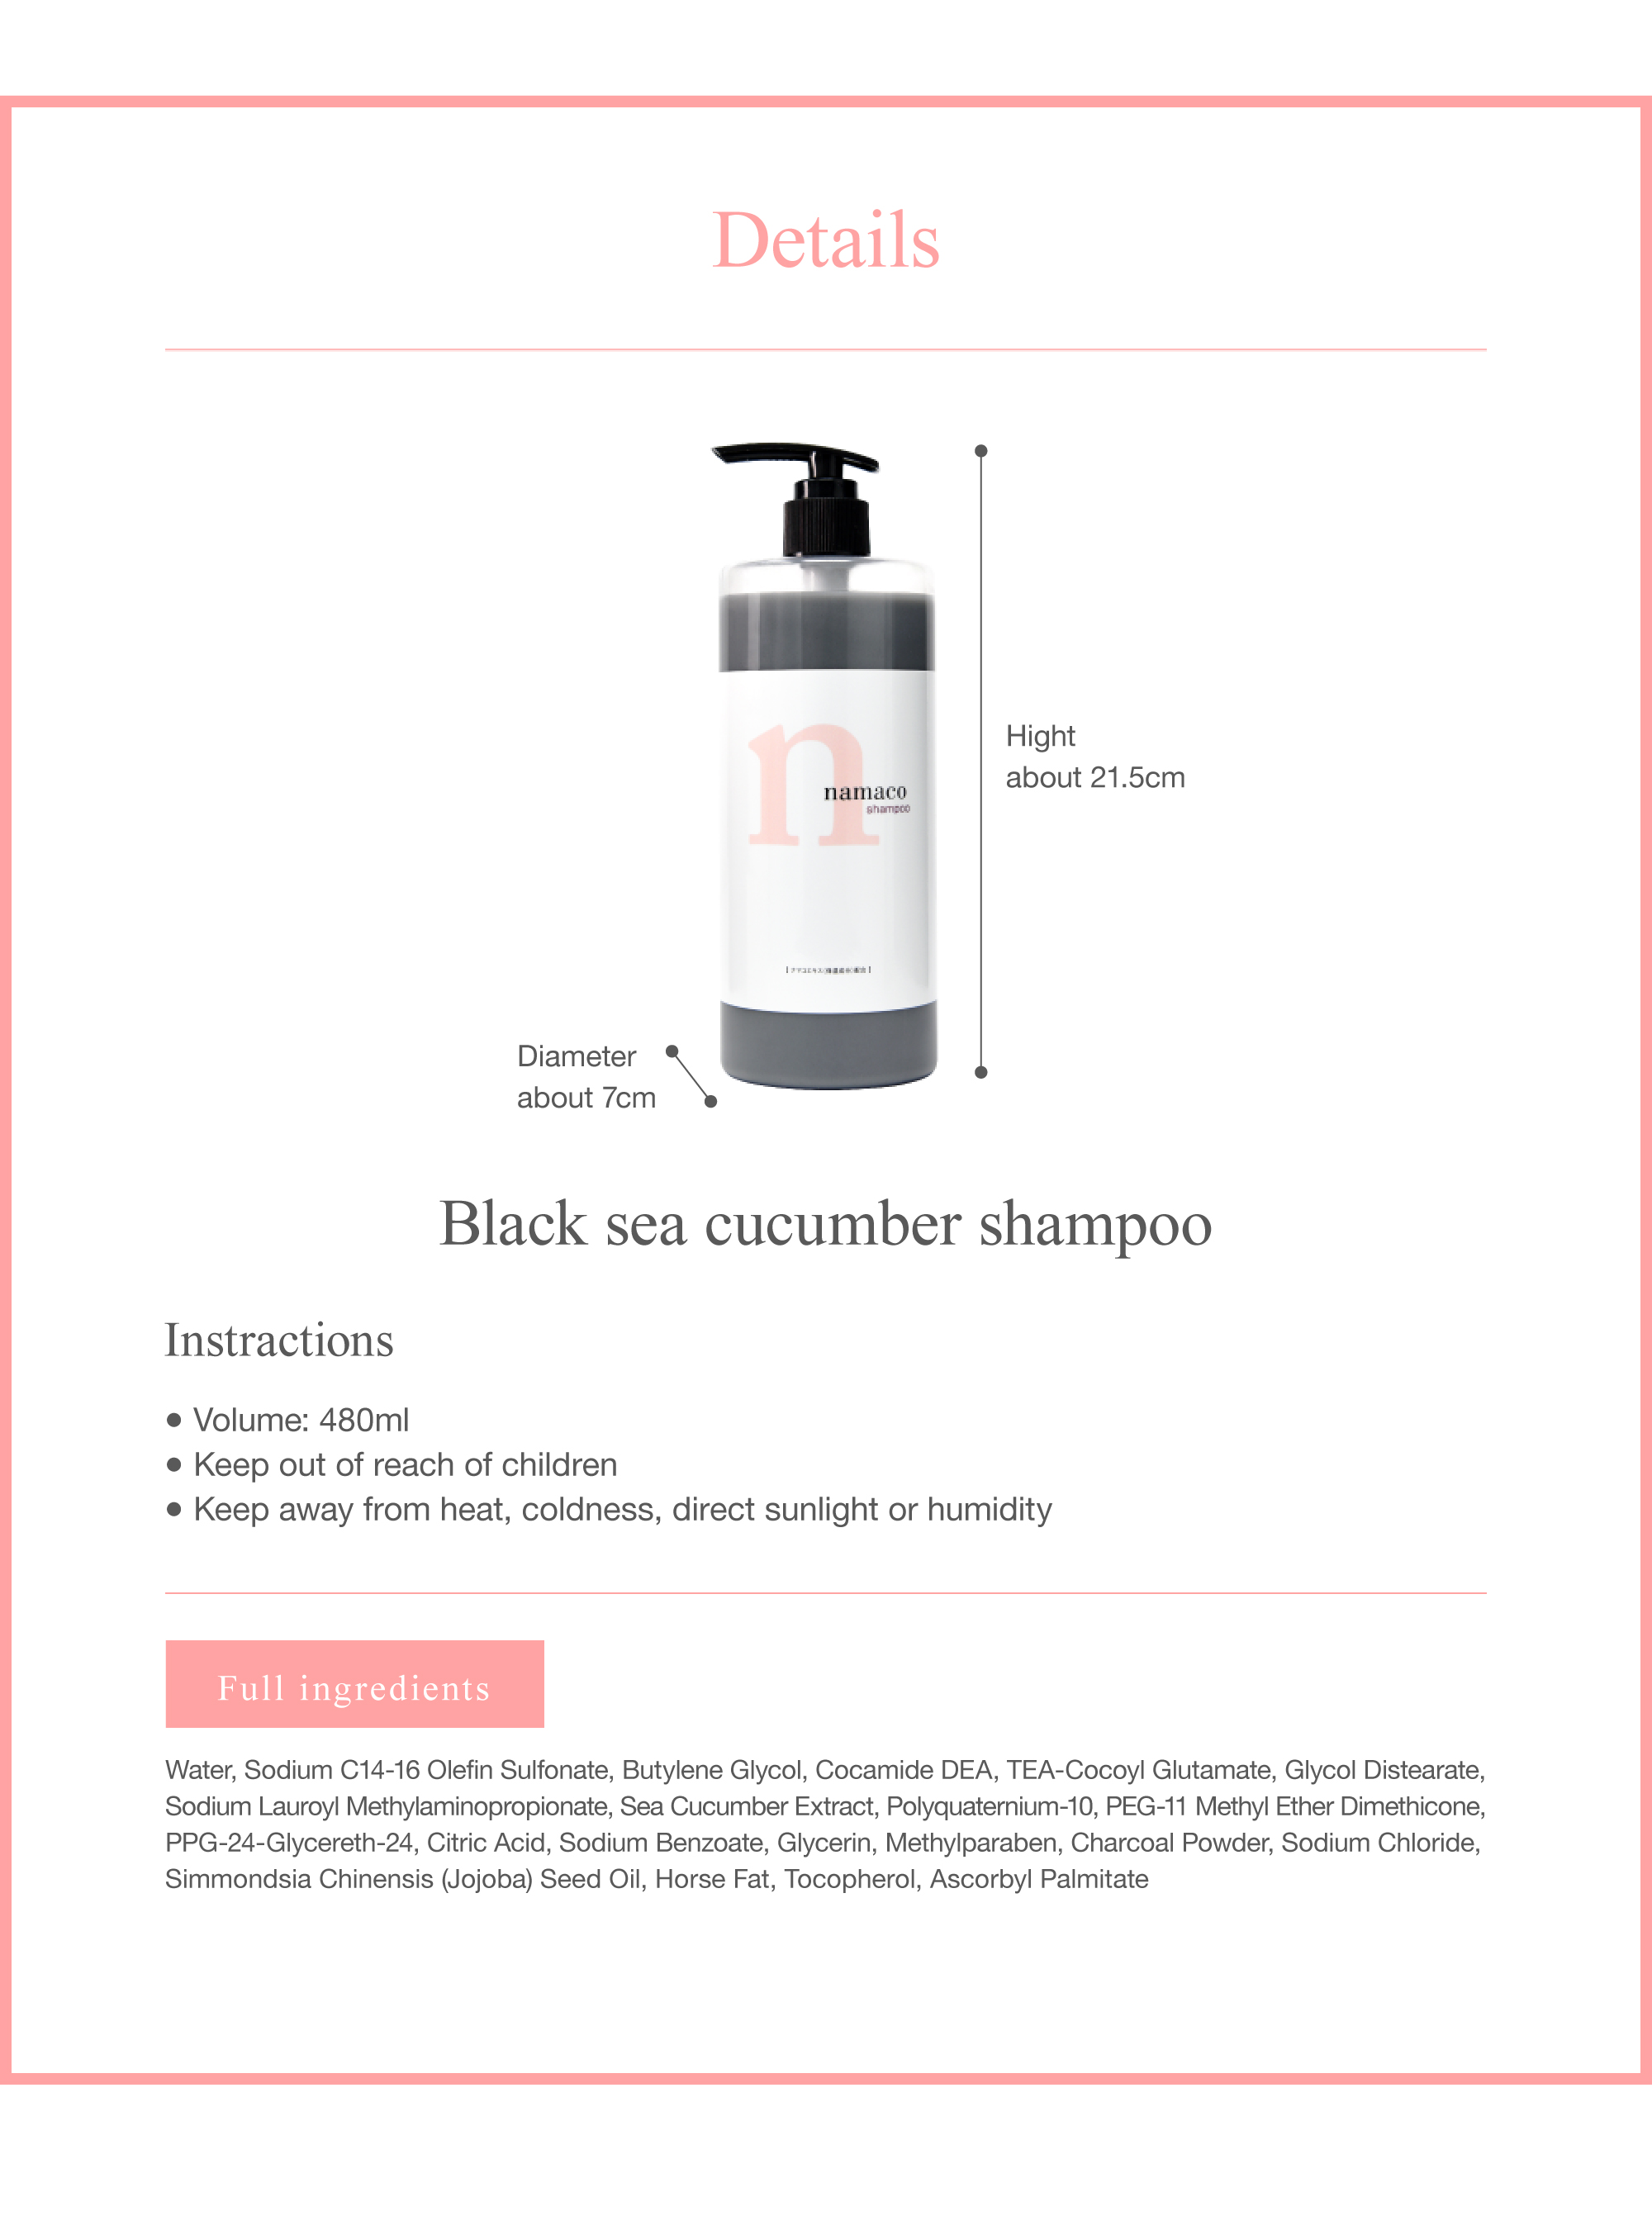 The dimensions of the black sea cucumber shampoo 480ml is Hight about 21.5cm, Diameter about 7cm